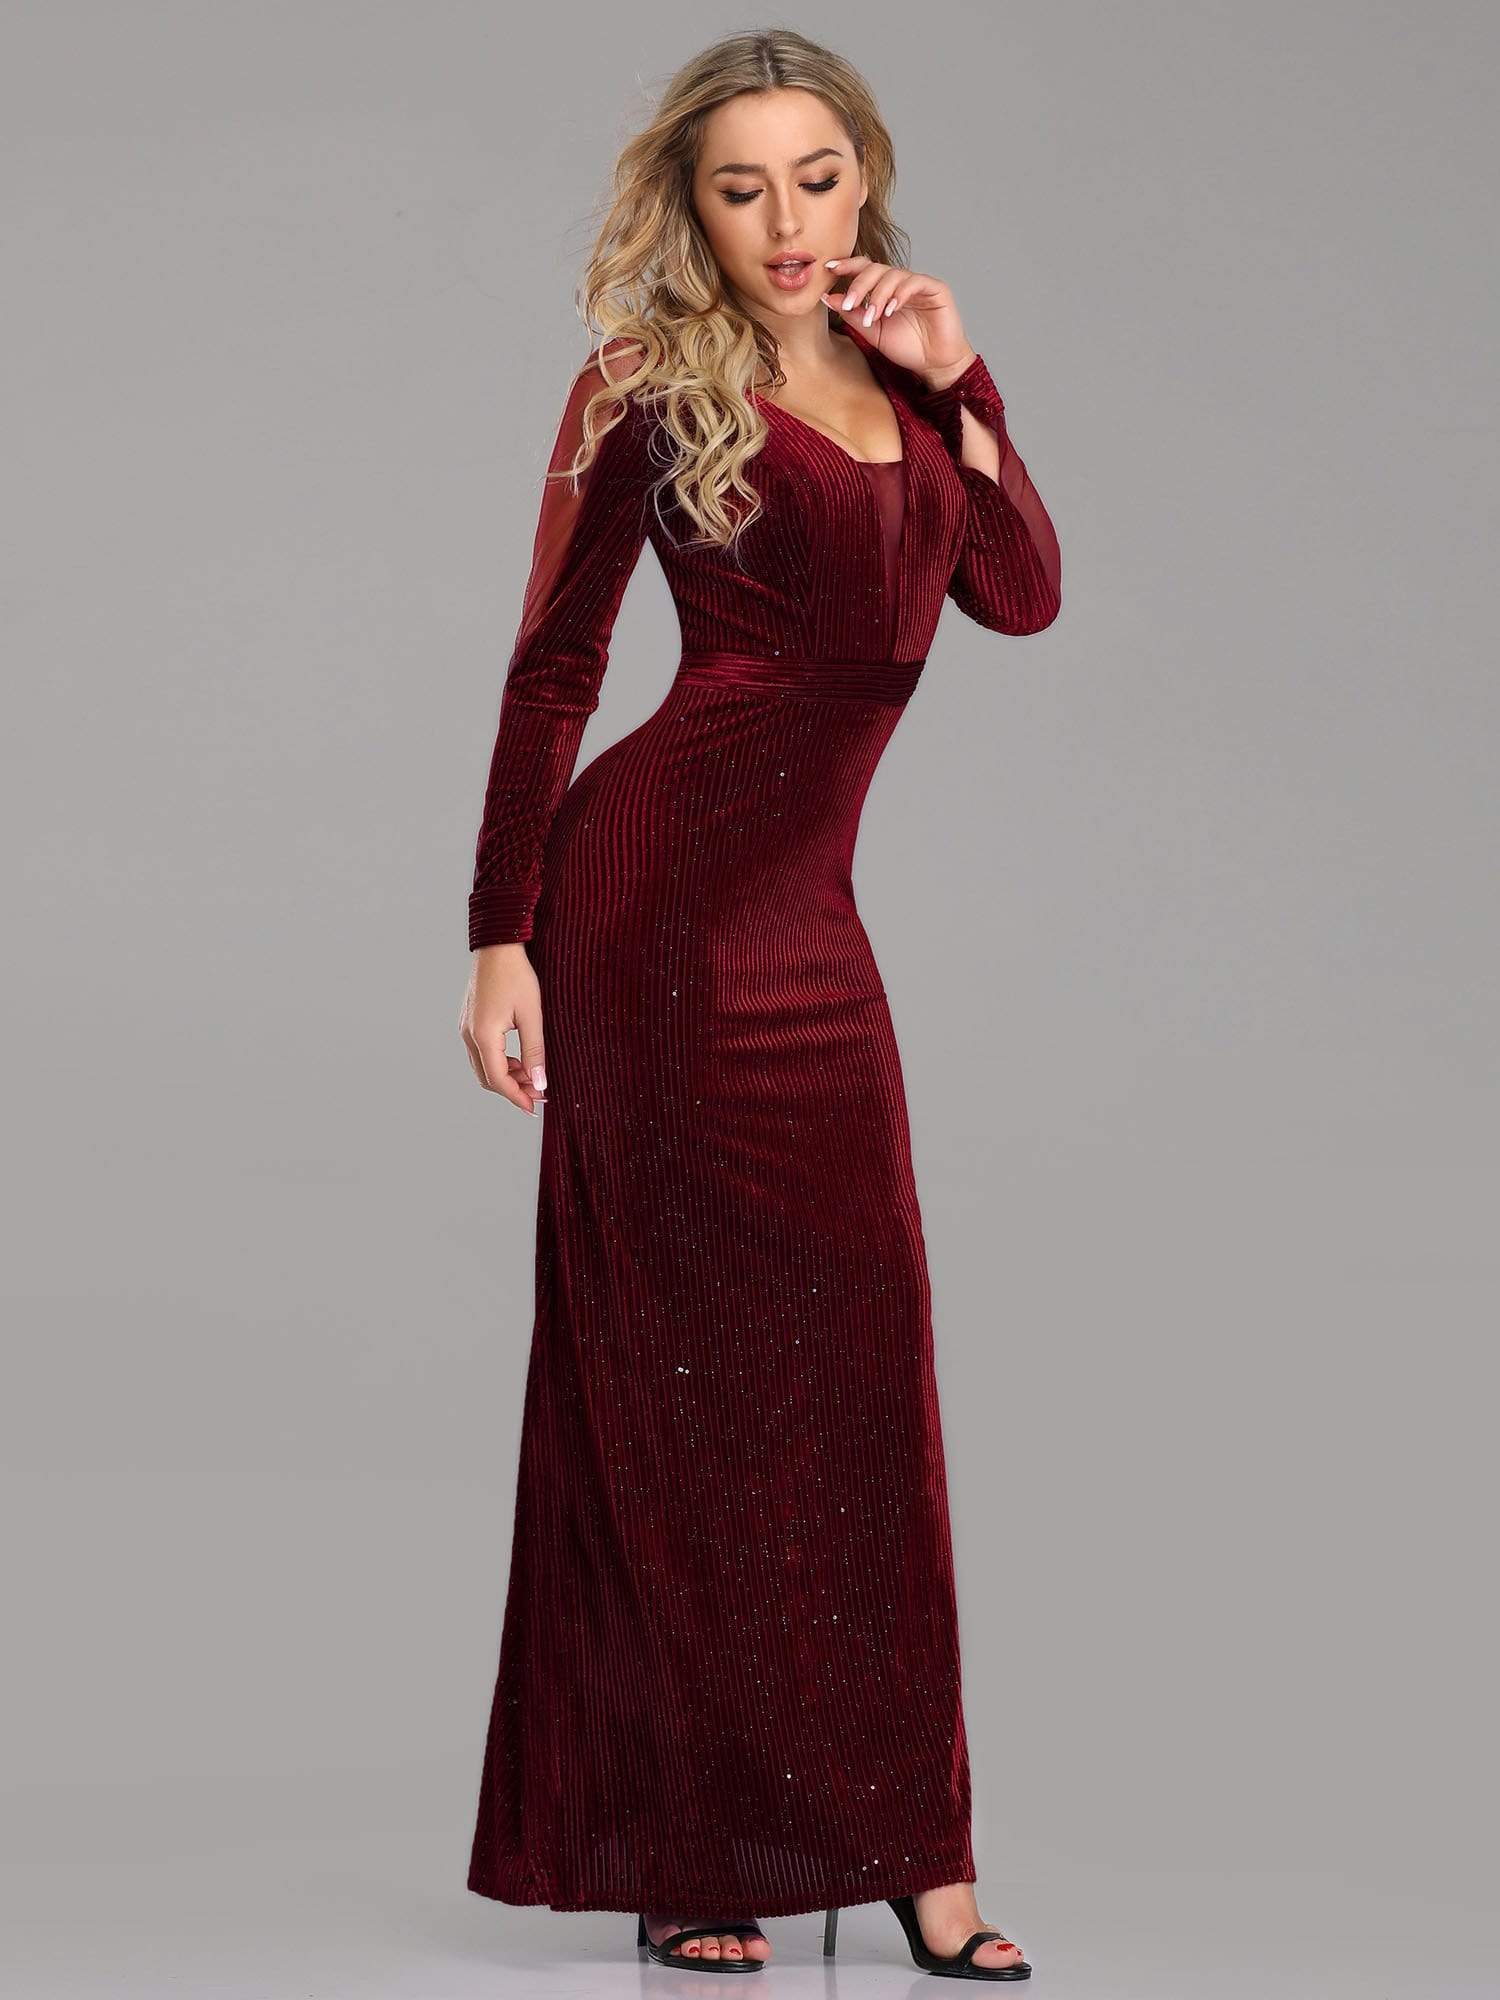 COLOR=Burgundy | Shimmery Evening Dress With Long Sleeves-Burgundy 3